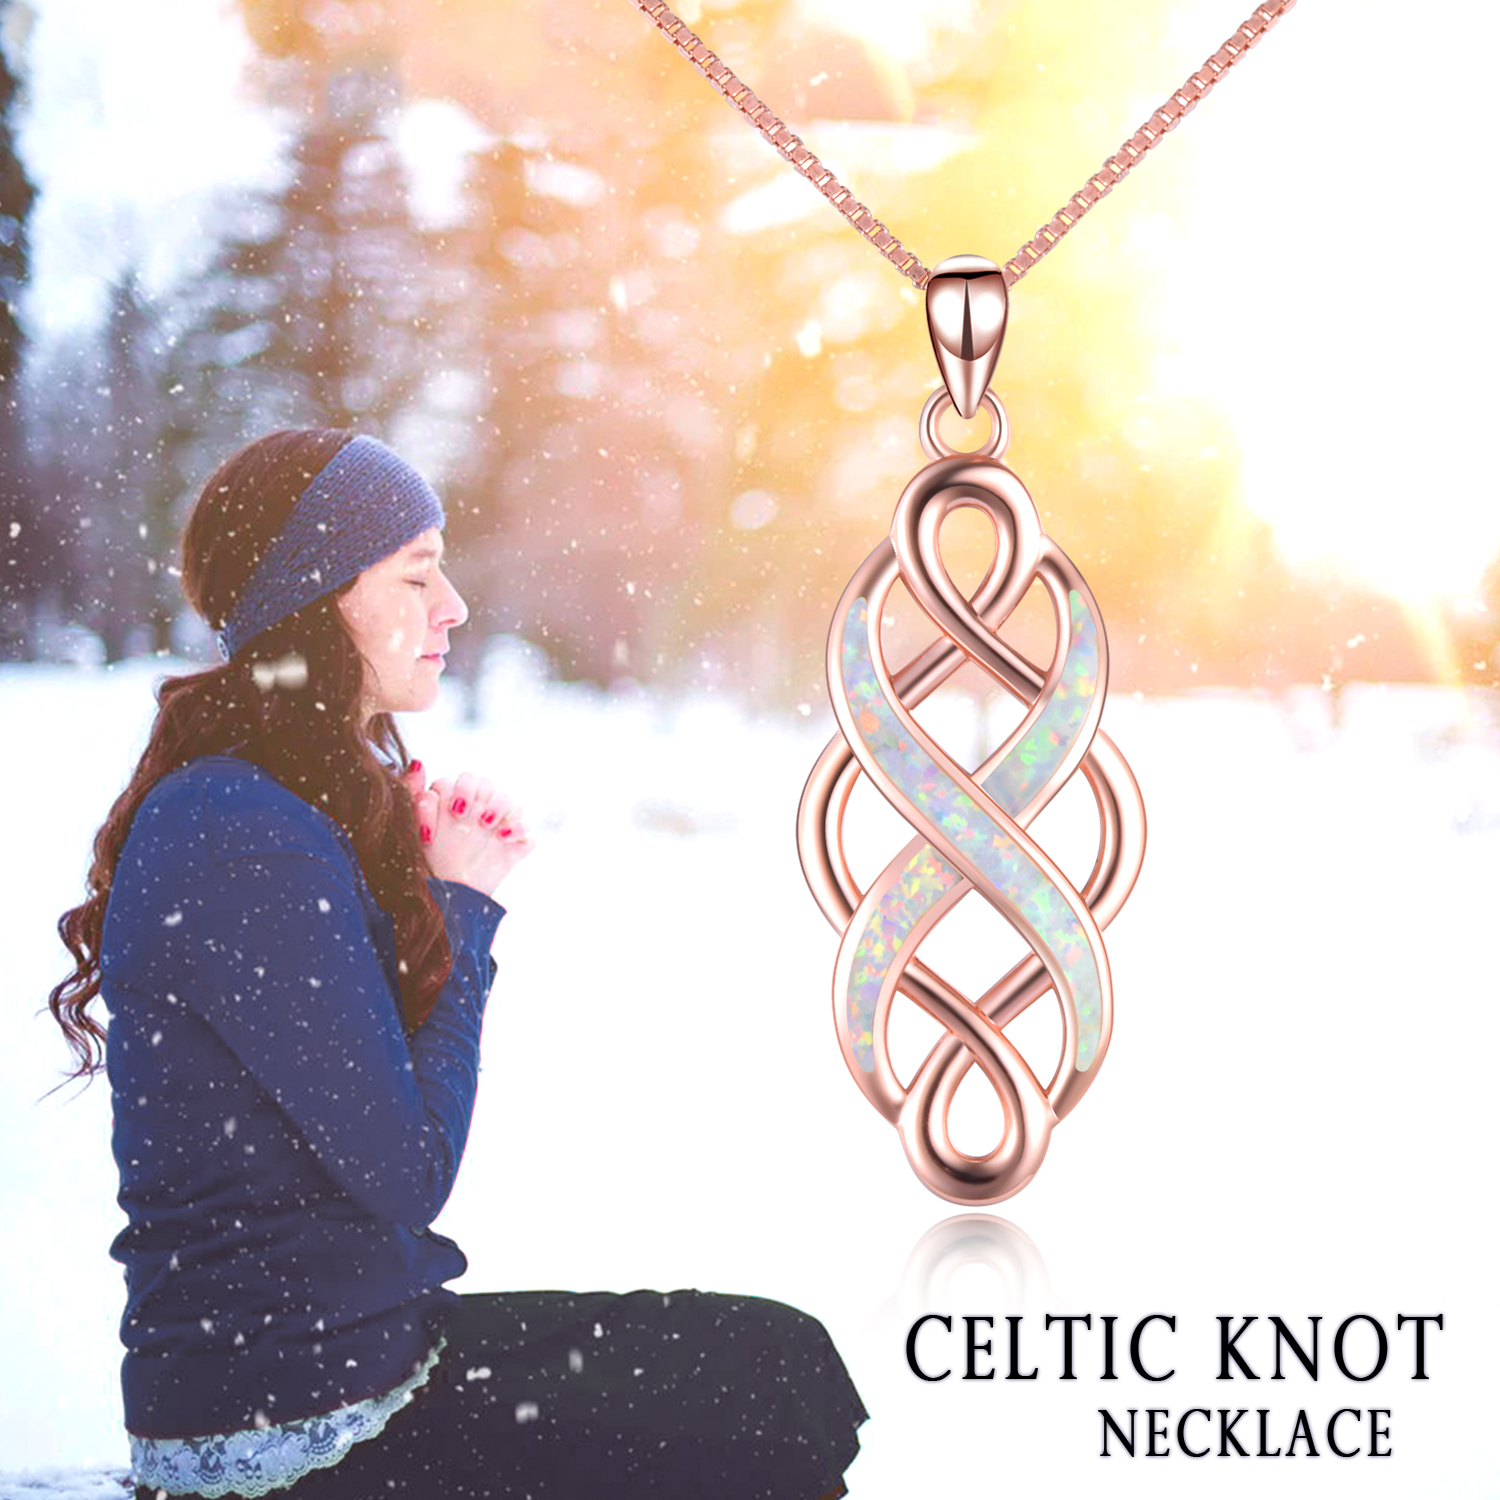 6b5f2099ec71cce94435ada15324eb5bPYX2901 M 4 - Sterling Silver Irish Celtic Knot Opal Pendant Necklace Infinity Love Necklace Gift for Her